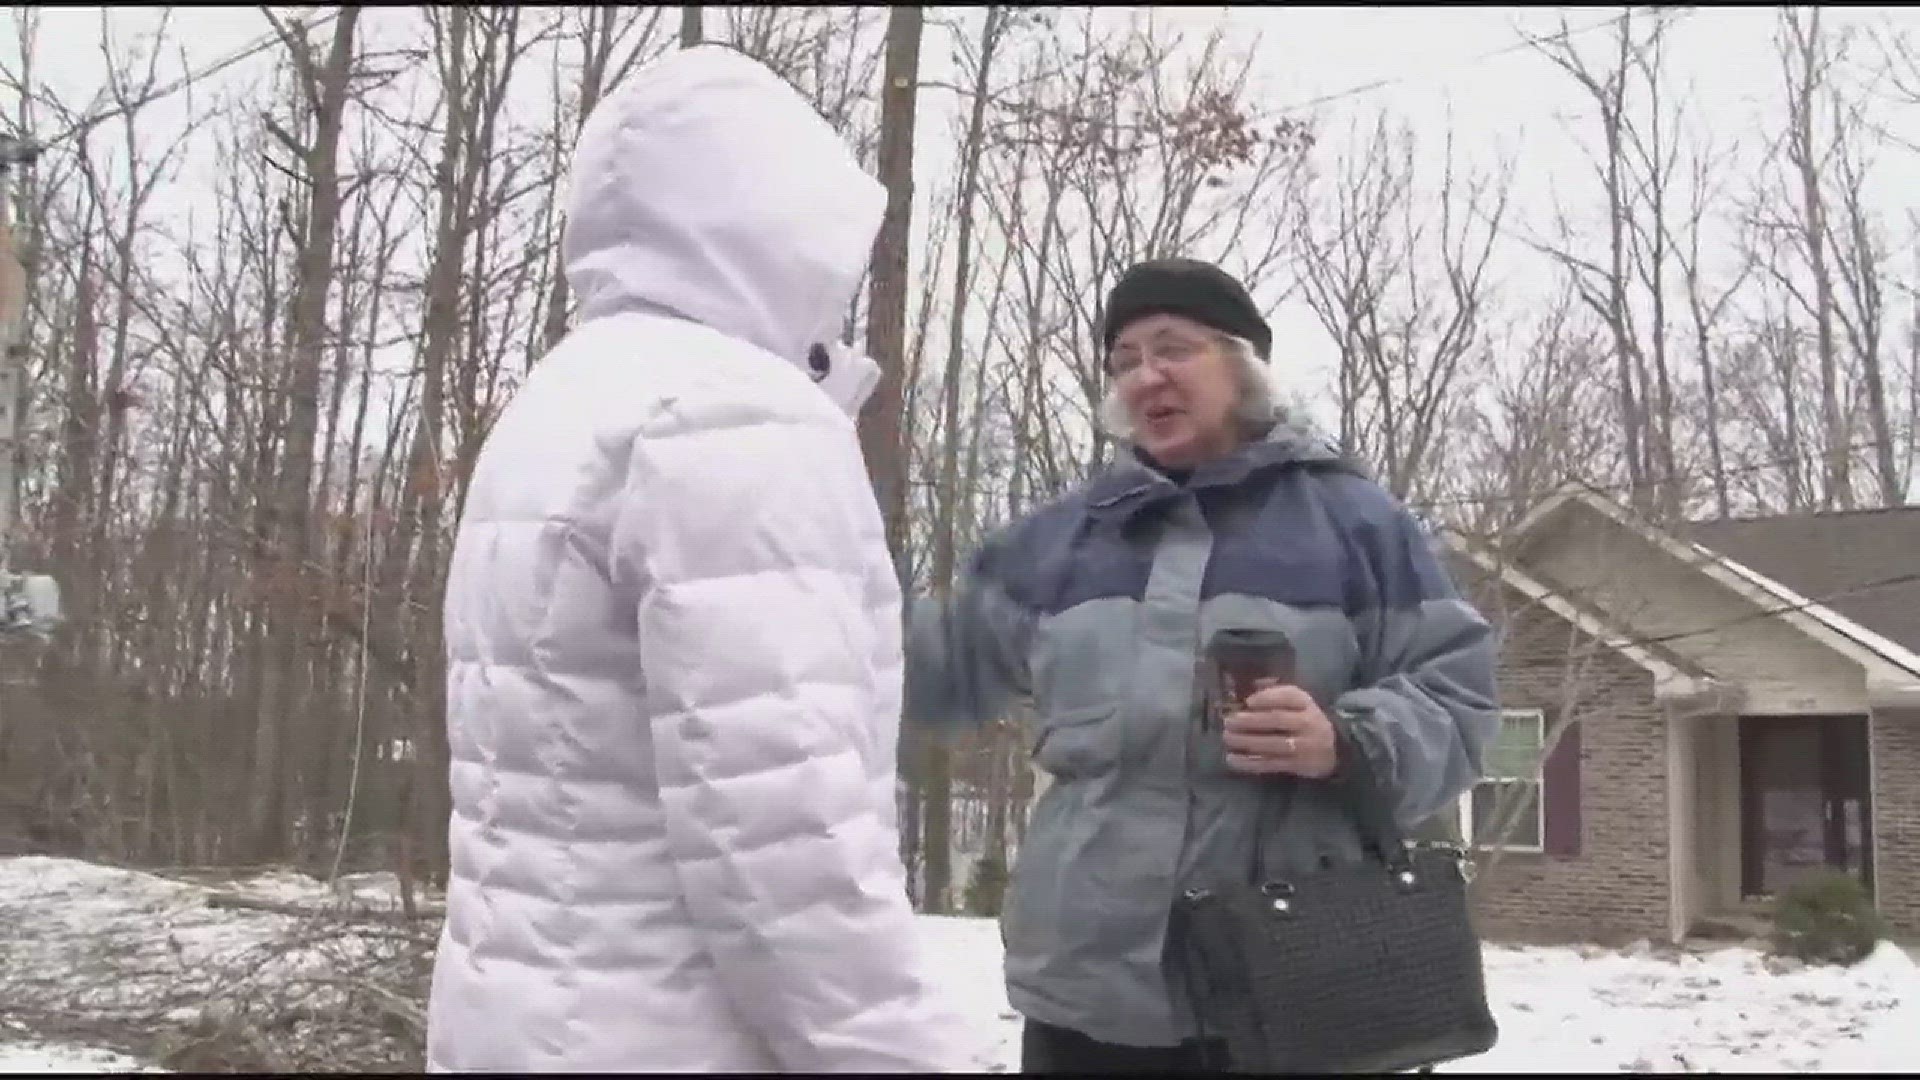 WBIR Reporter Emily Stroud talks to a Wisconsin native without power about how he's coping with the winter weather in Cumberland County.